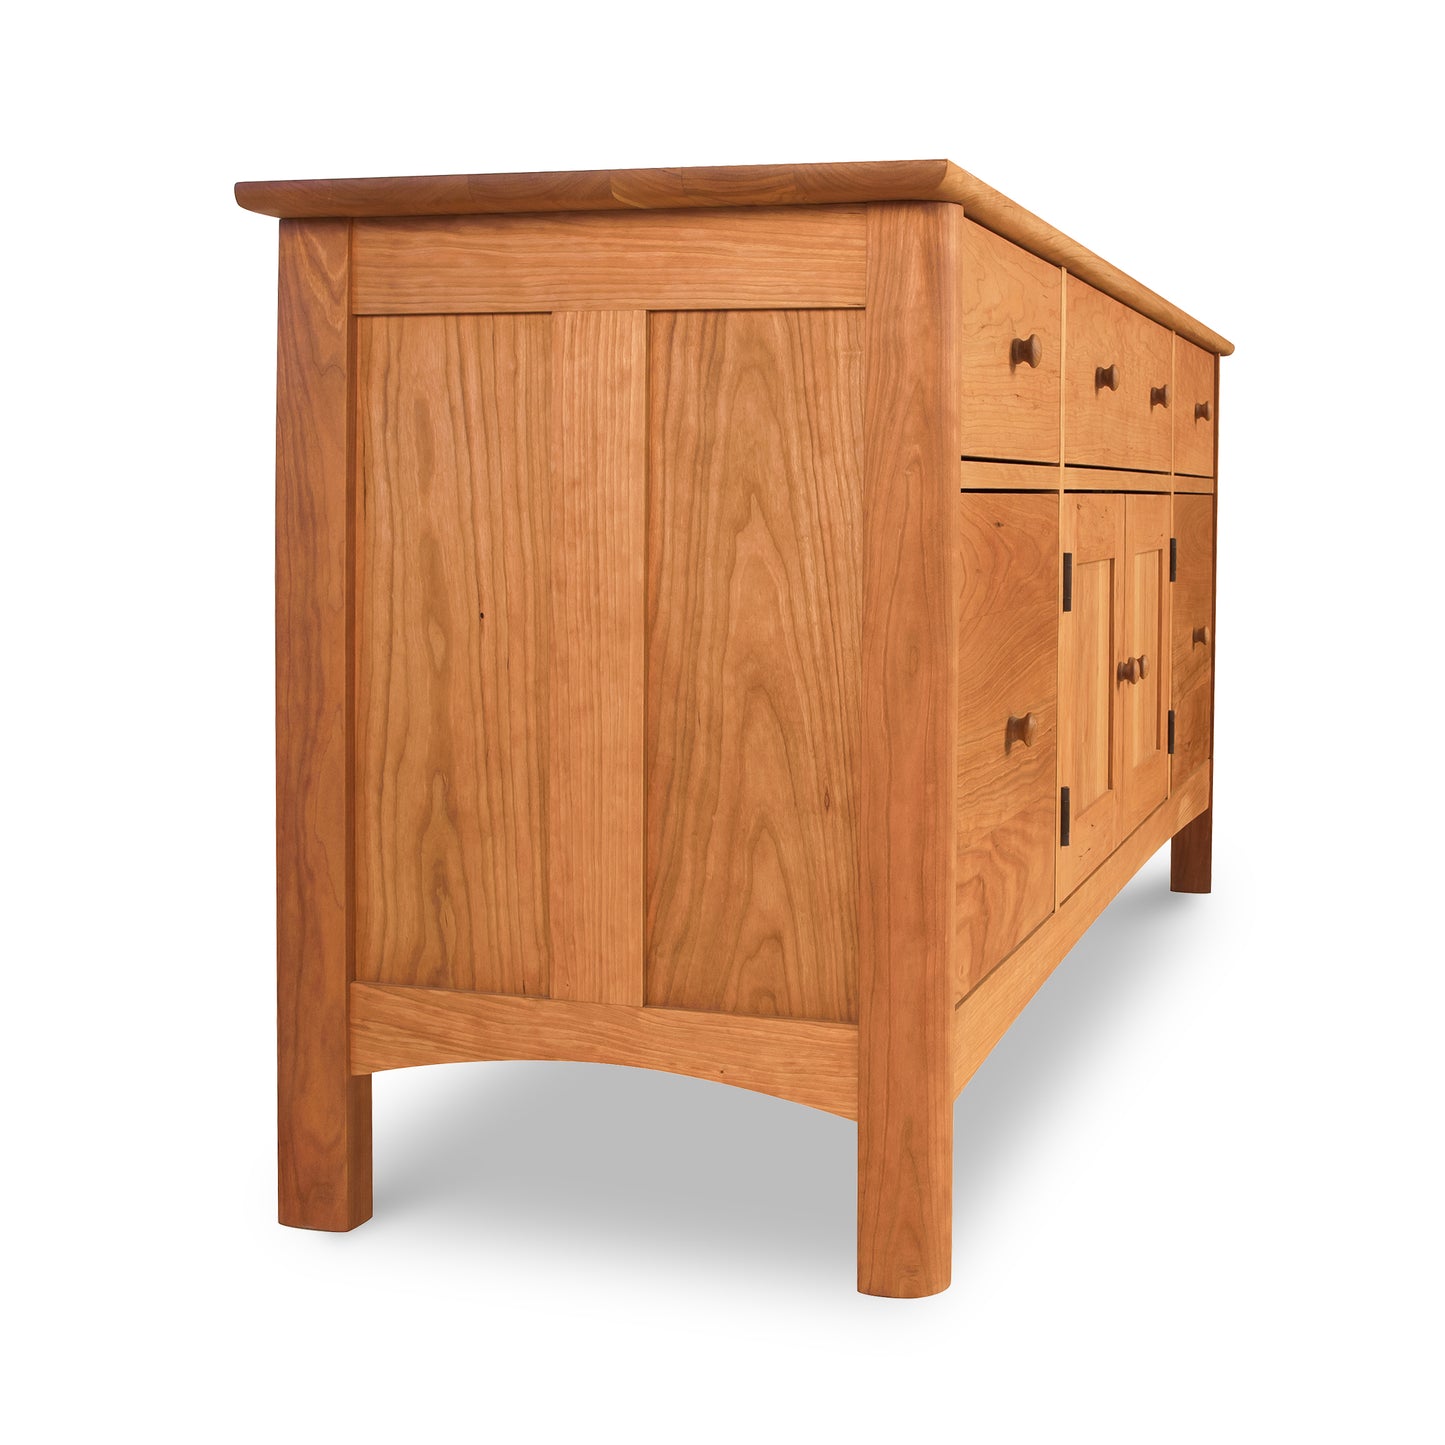 Solid hardwood Heartwood Shaker File Credenza with doors and file drawer isolated on a white background by Vermont Furniture Designs.